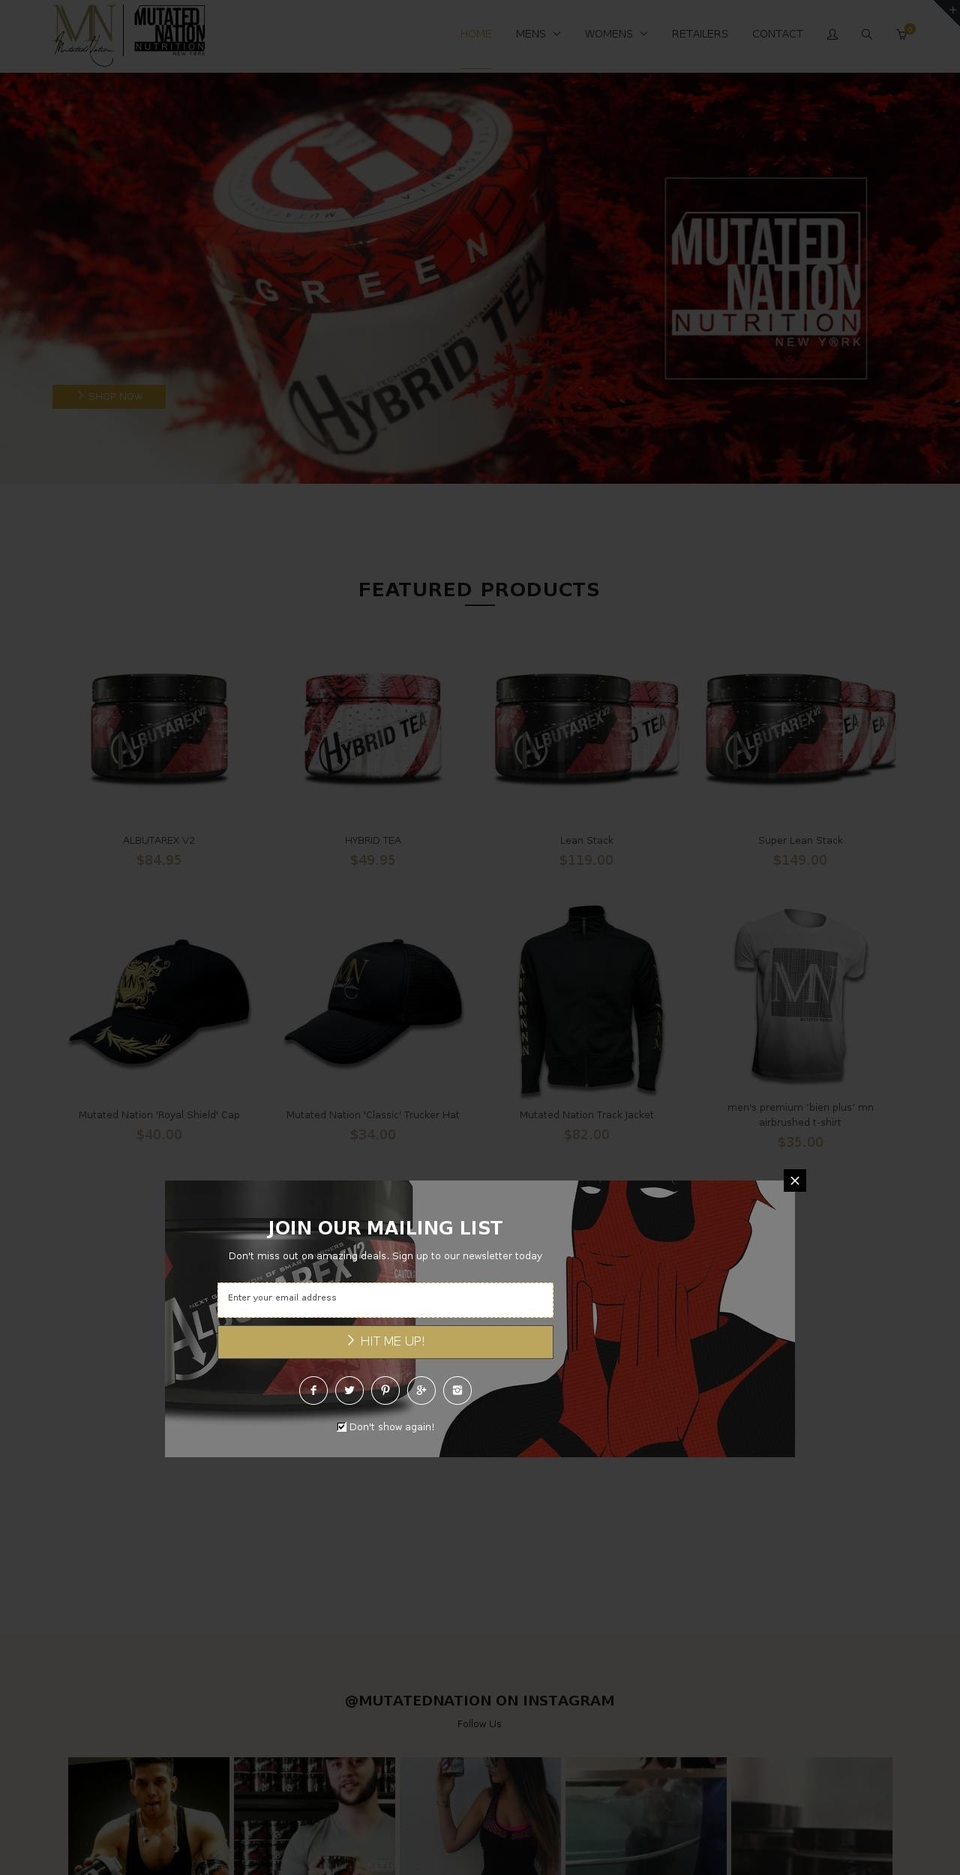 install Shopify theme site example mutatednation.com